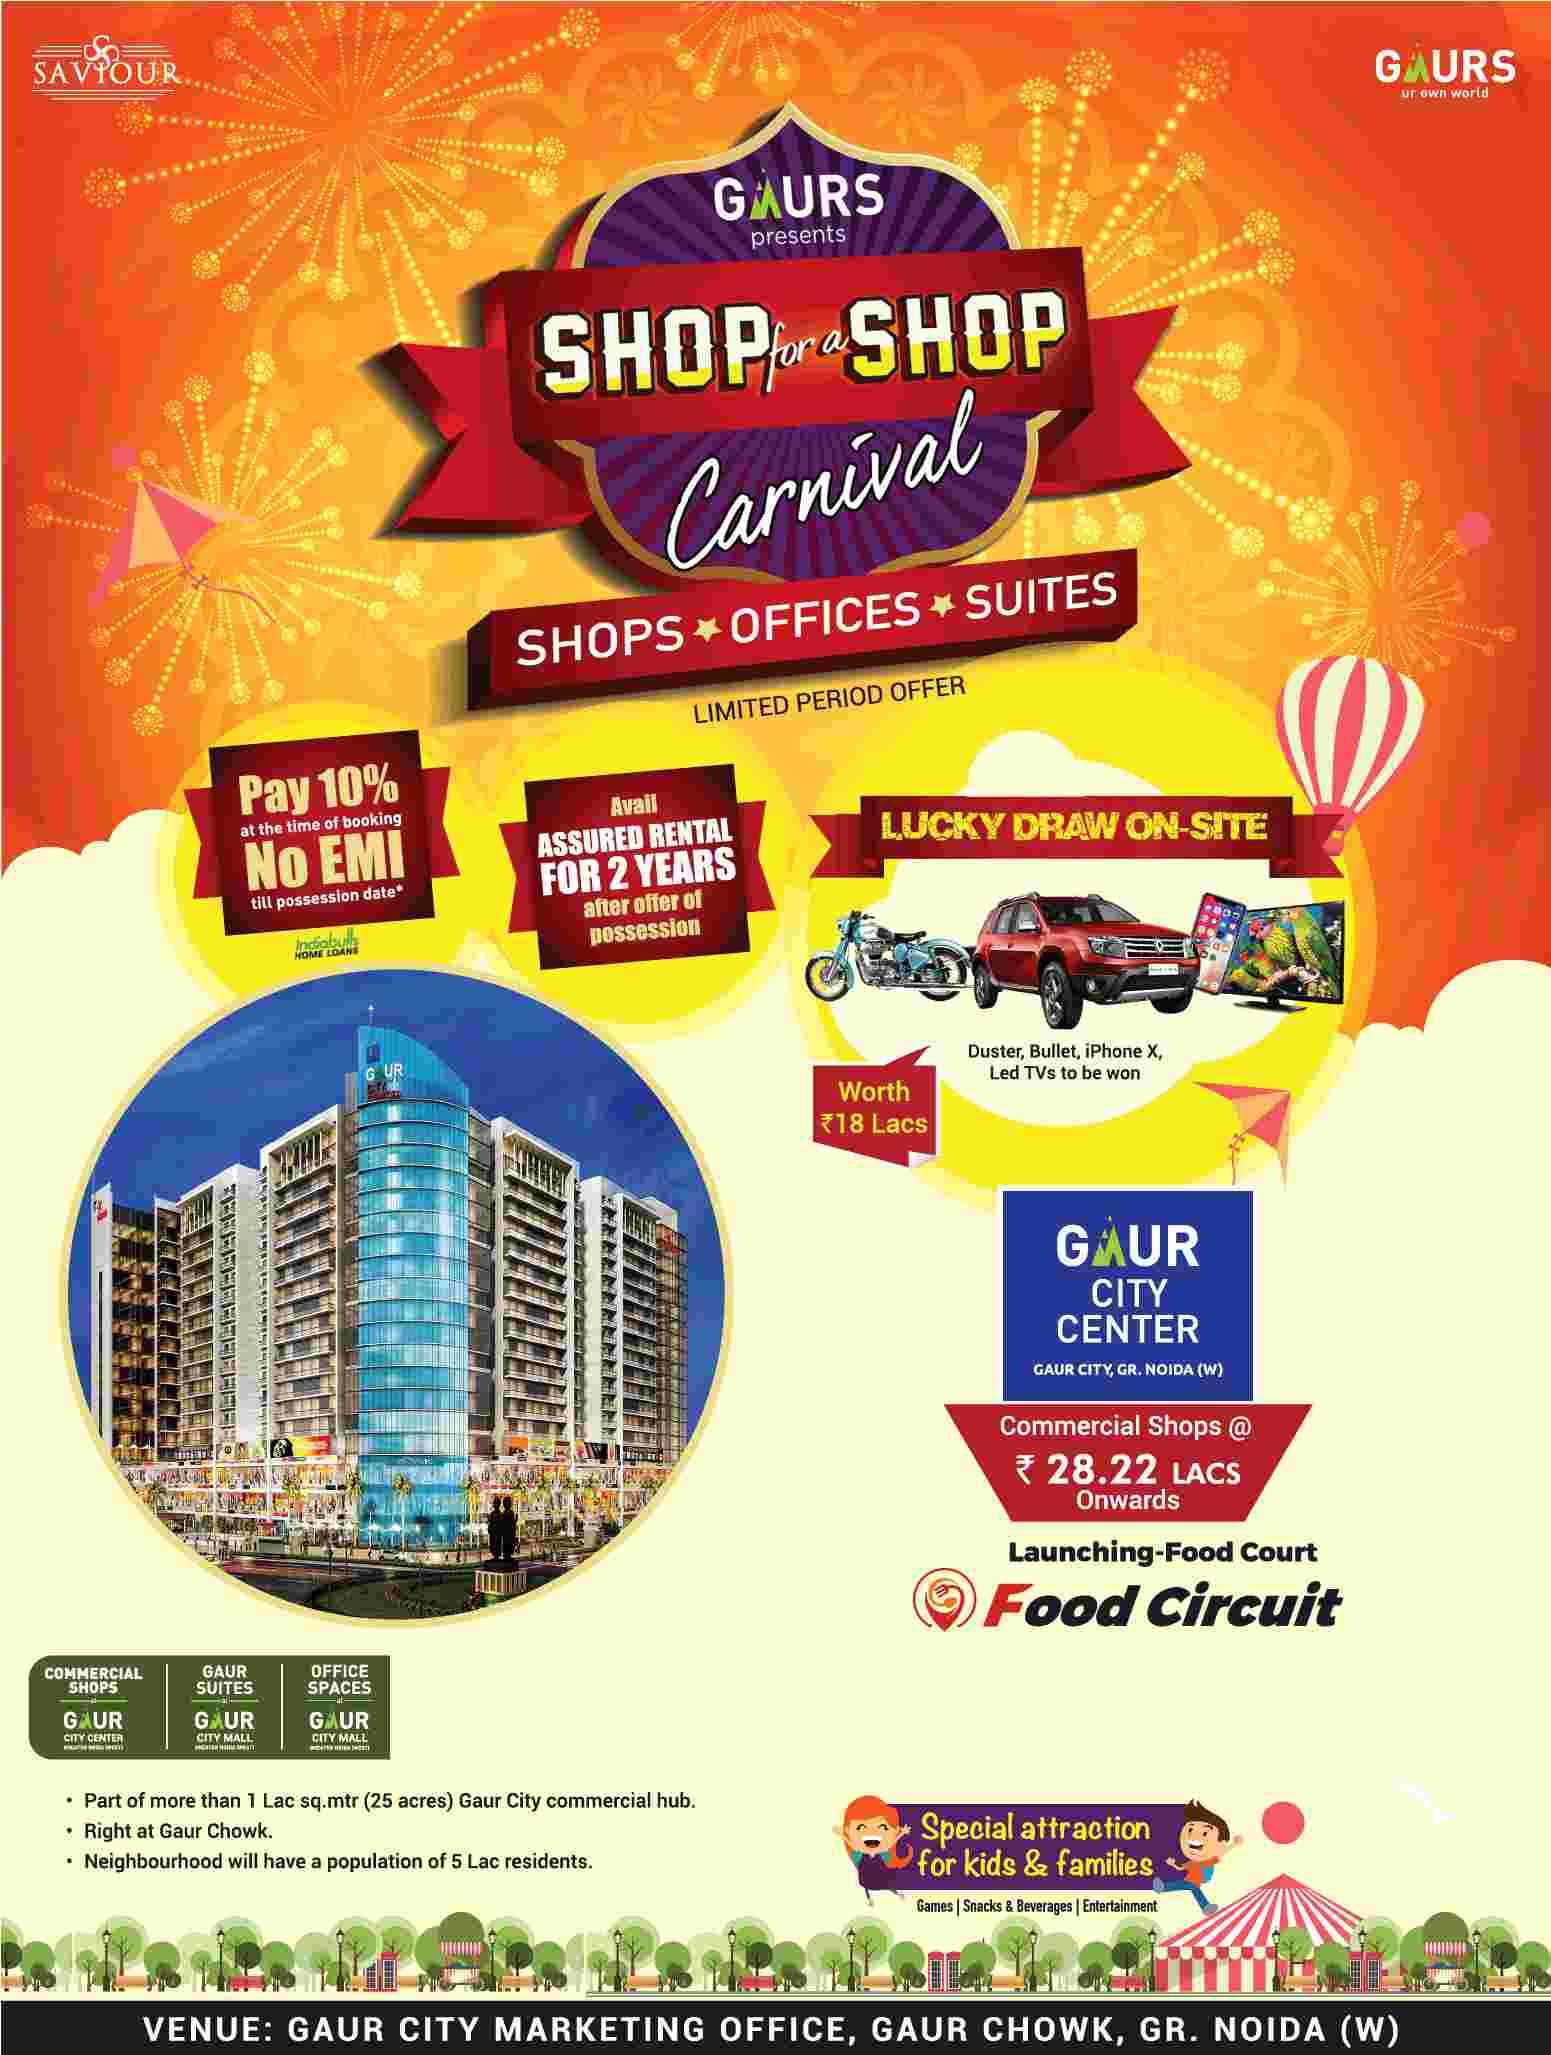 Gaurs presents shop for a shop carnival in Greater Noida Update